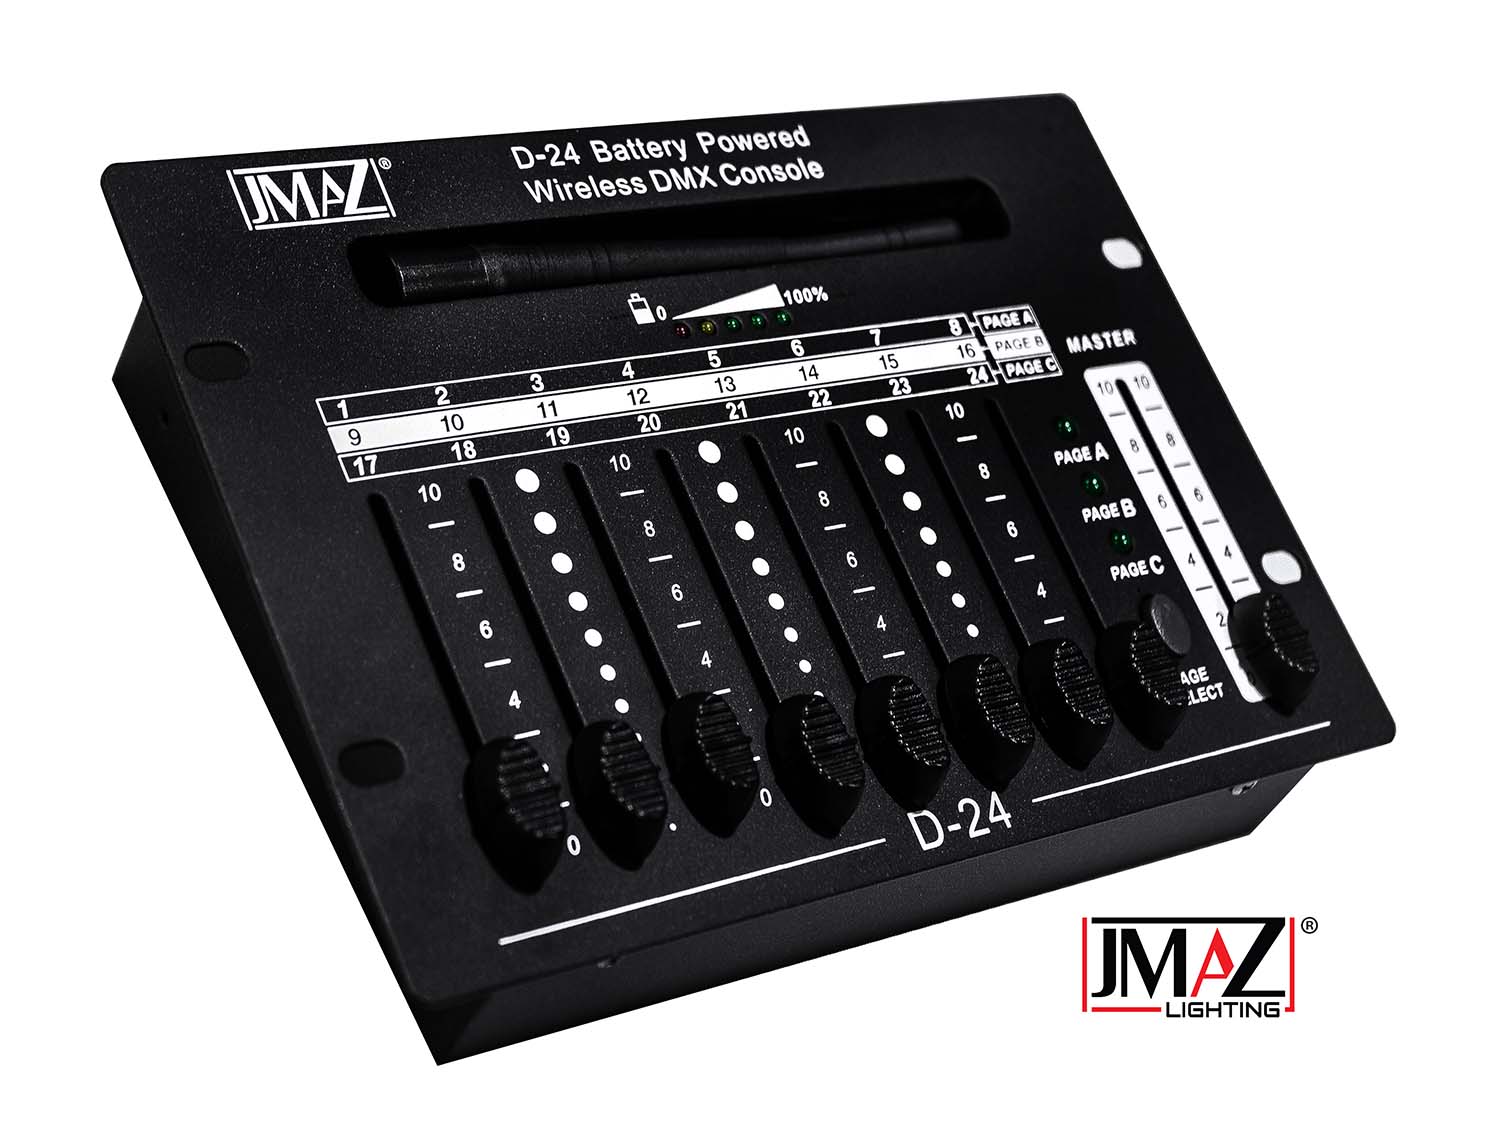 B-Stock: JMAZ JZ6001 Battery Powered D-24 Wireless DMX Controller With 24 Channel and 20 Hour Battery Life - Hollywood DJ